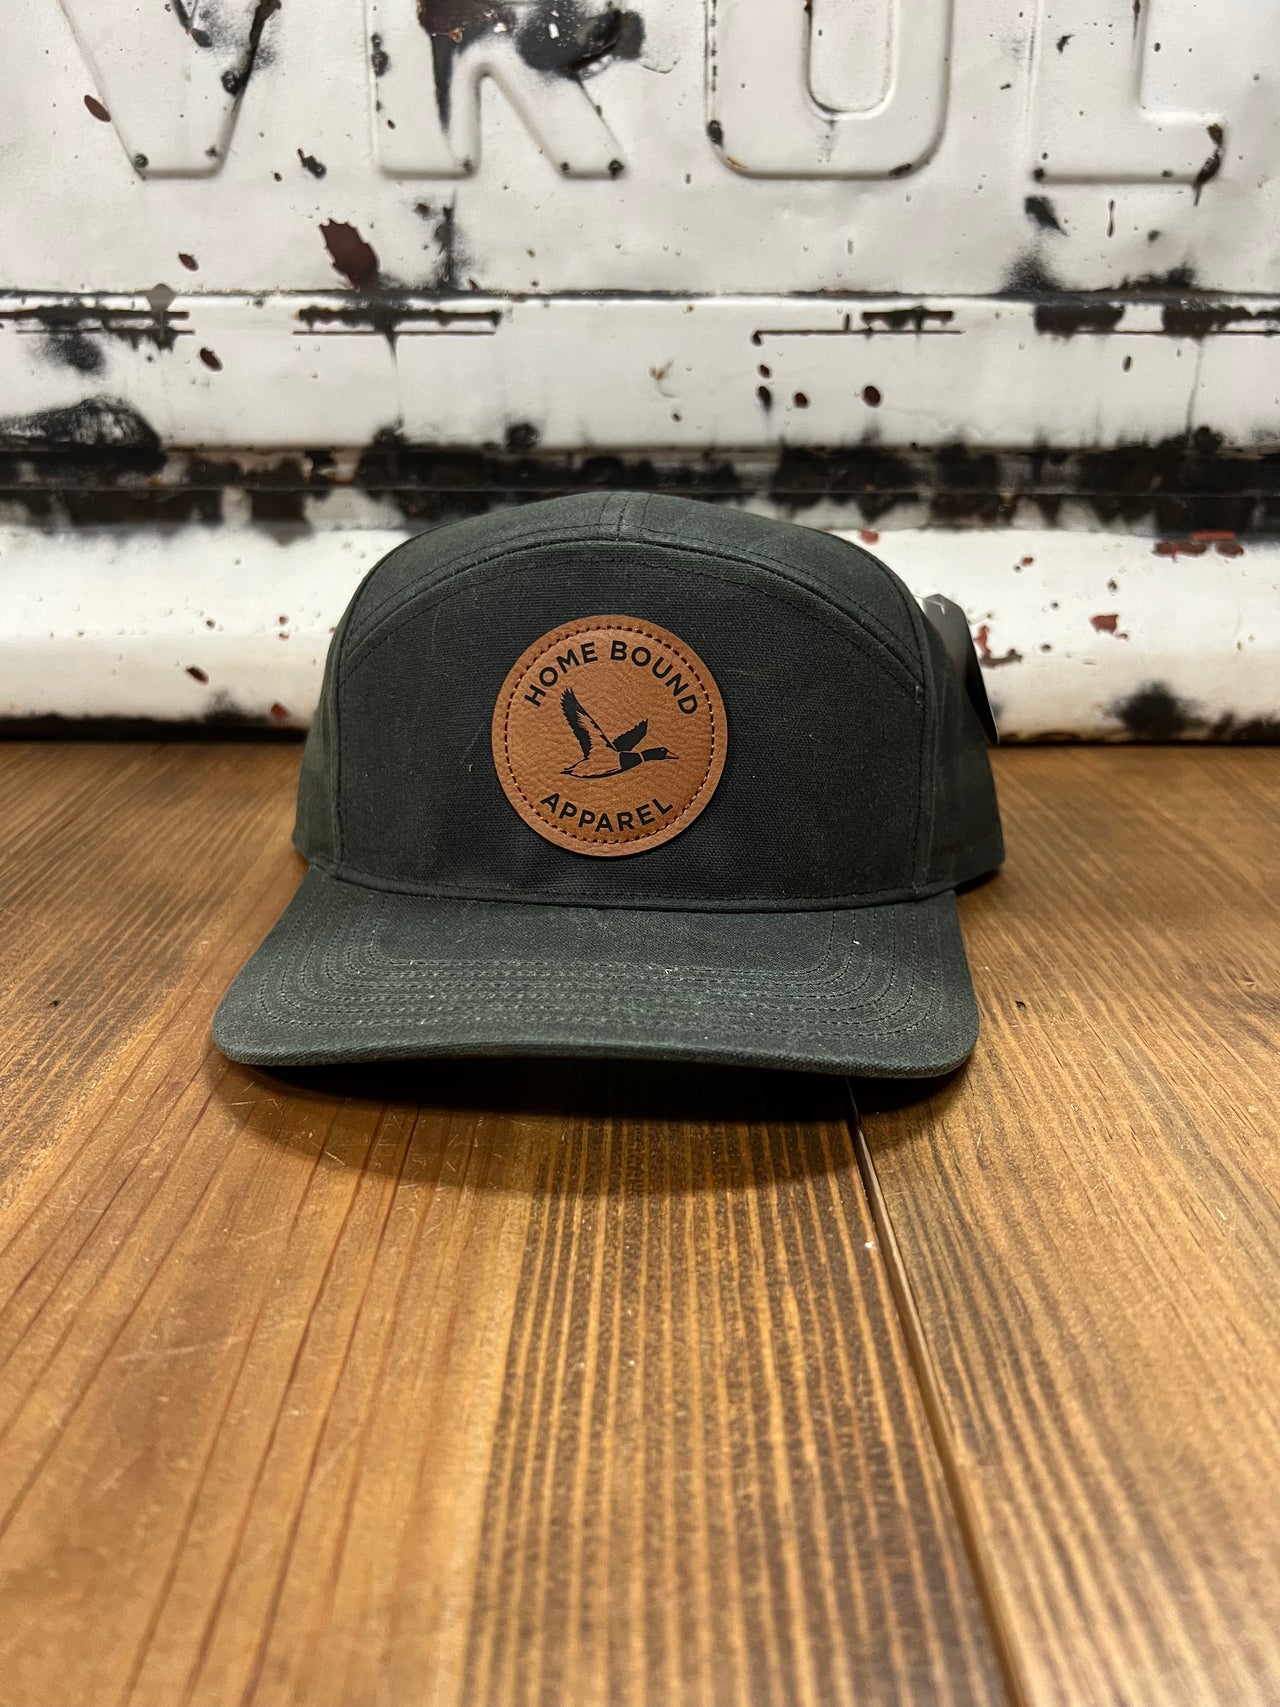 Home Bound Flying Duck Leather Patch Cap - Waxed Dark Olive